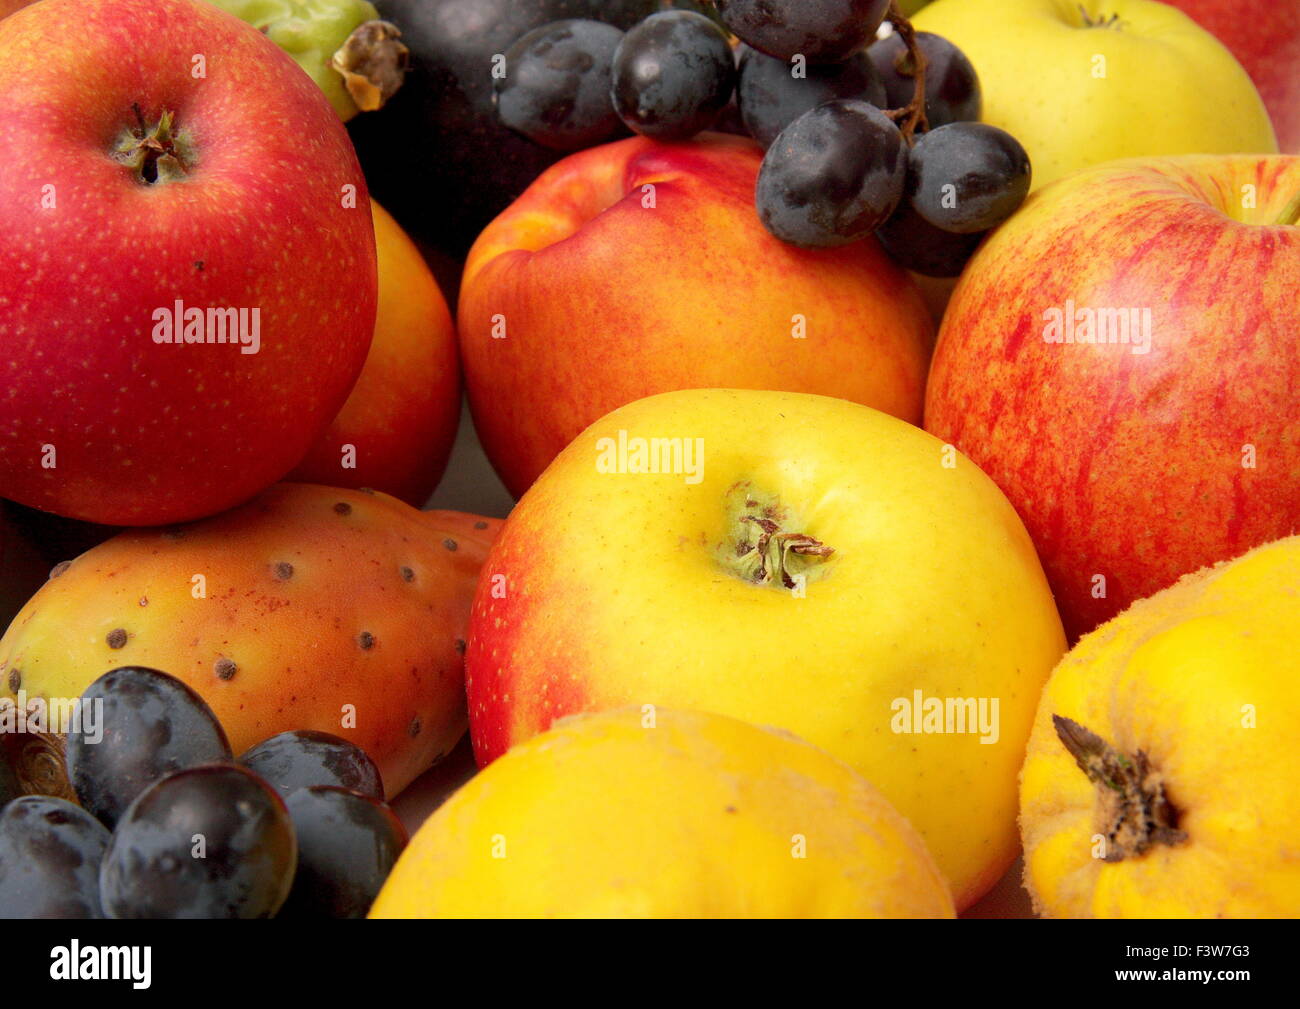 Obst 1 Stock Photo